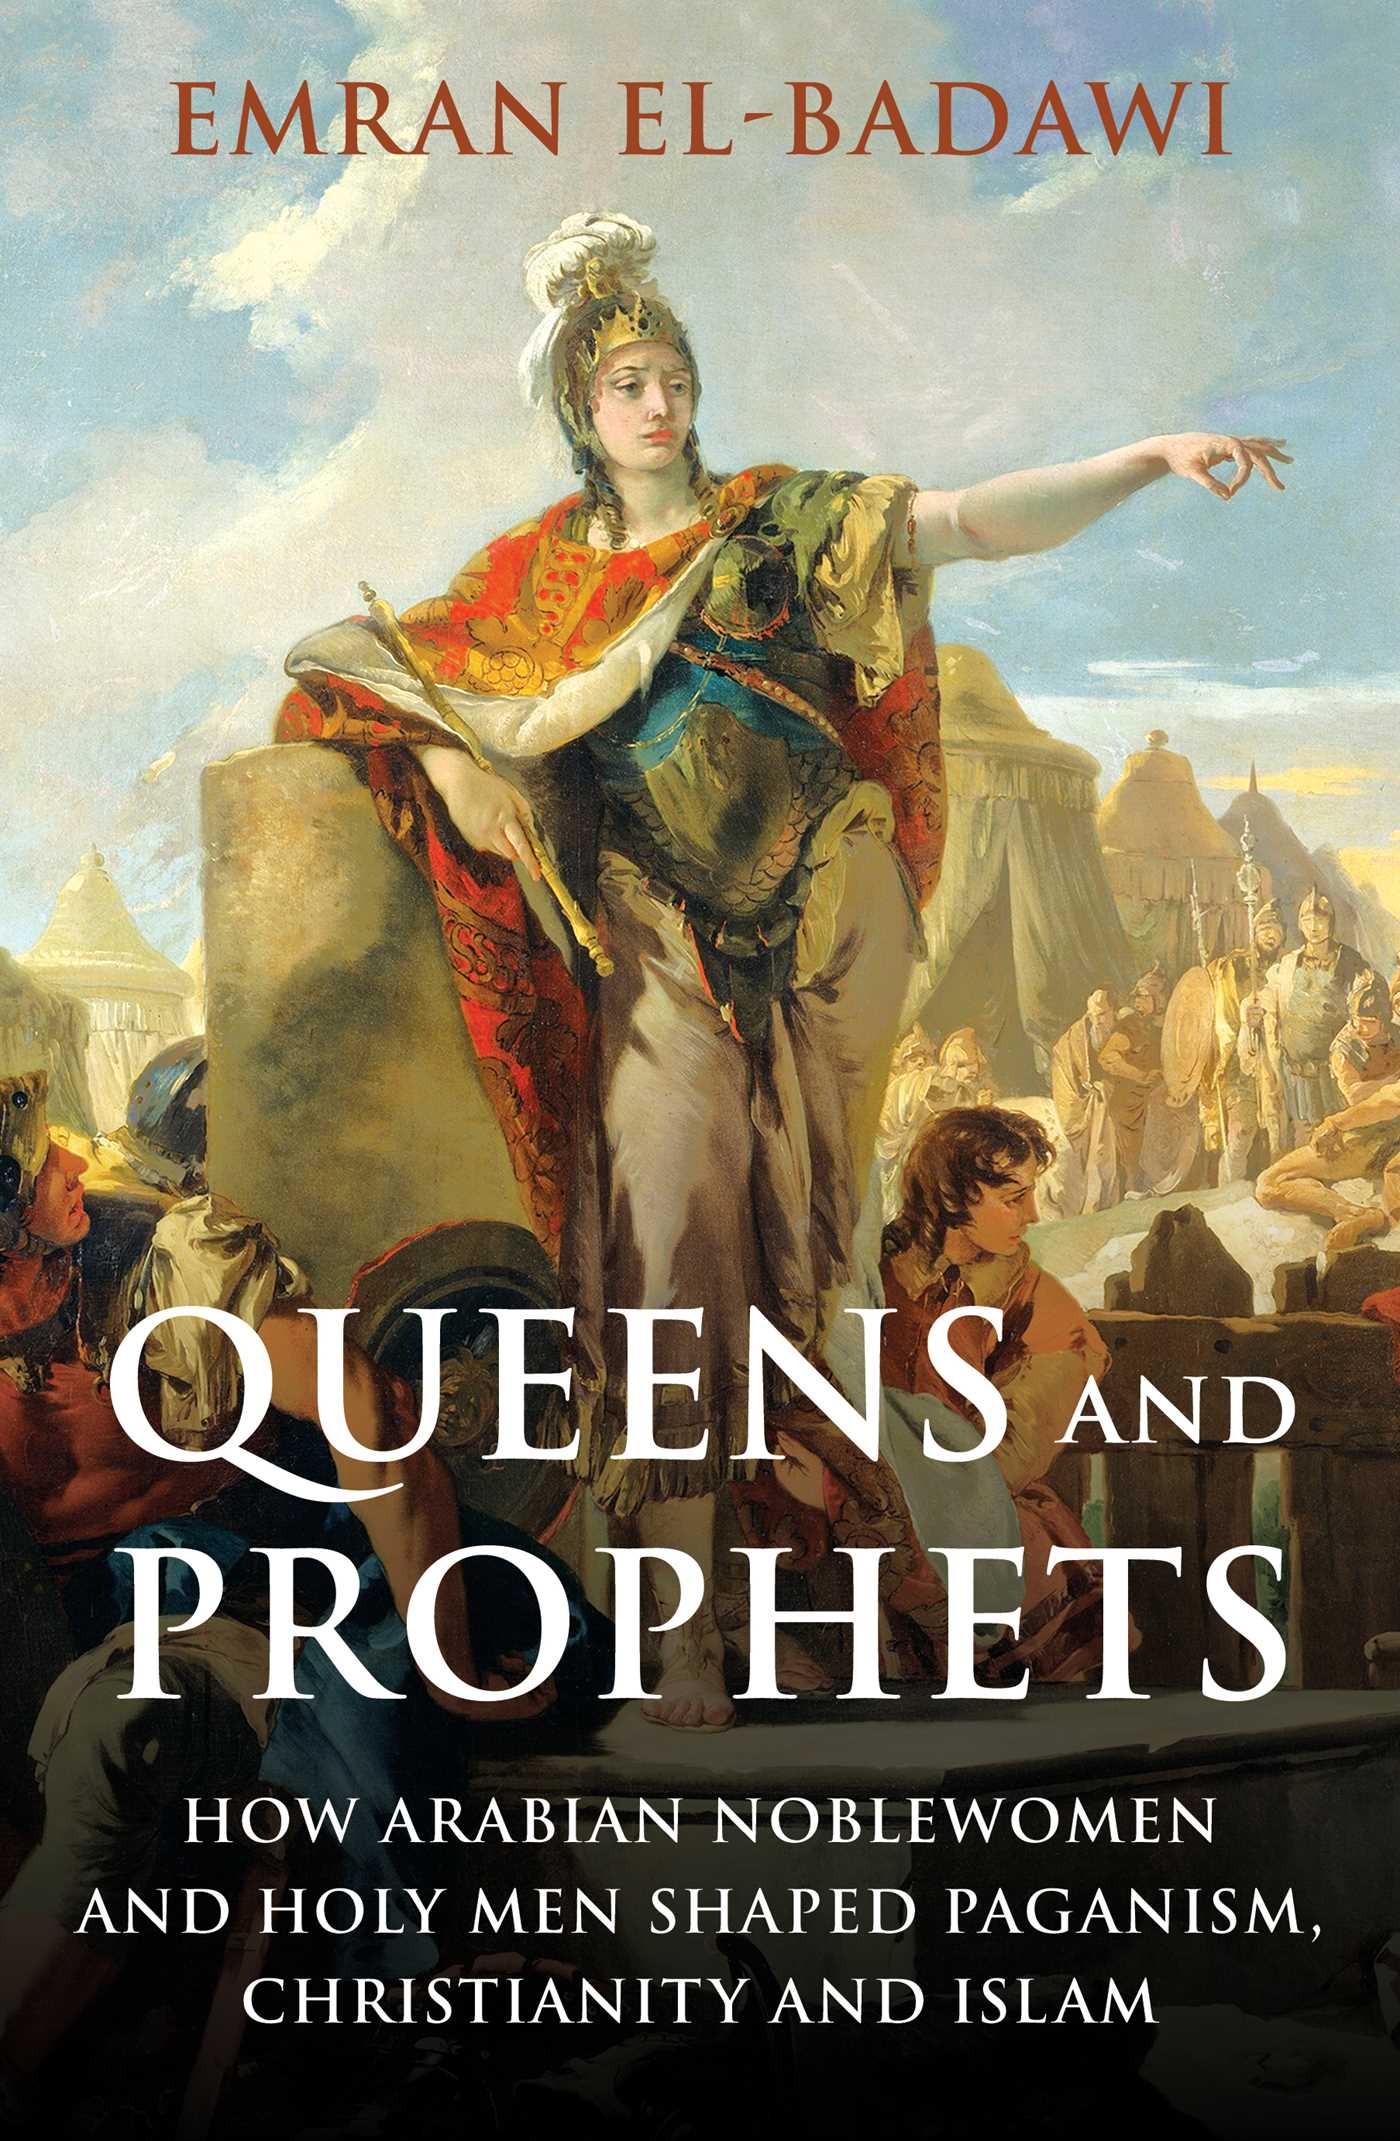 Queens and Prophets : How Arabian Noblewomen and Holy Men Shaped Paganism, Christianity and Islam | El-Badawi, Emran Iqbal